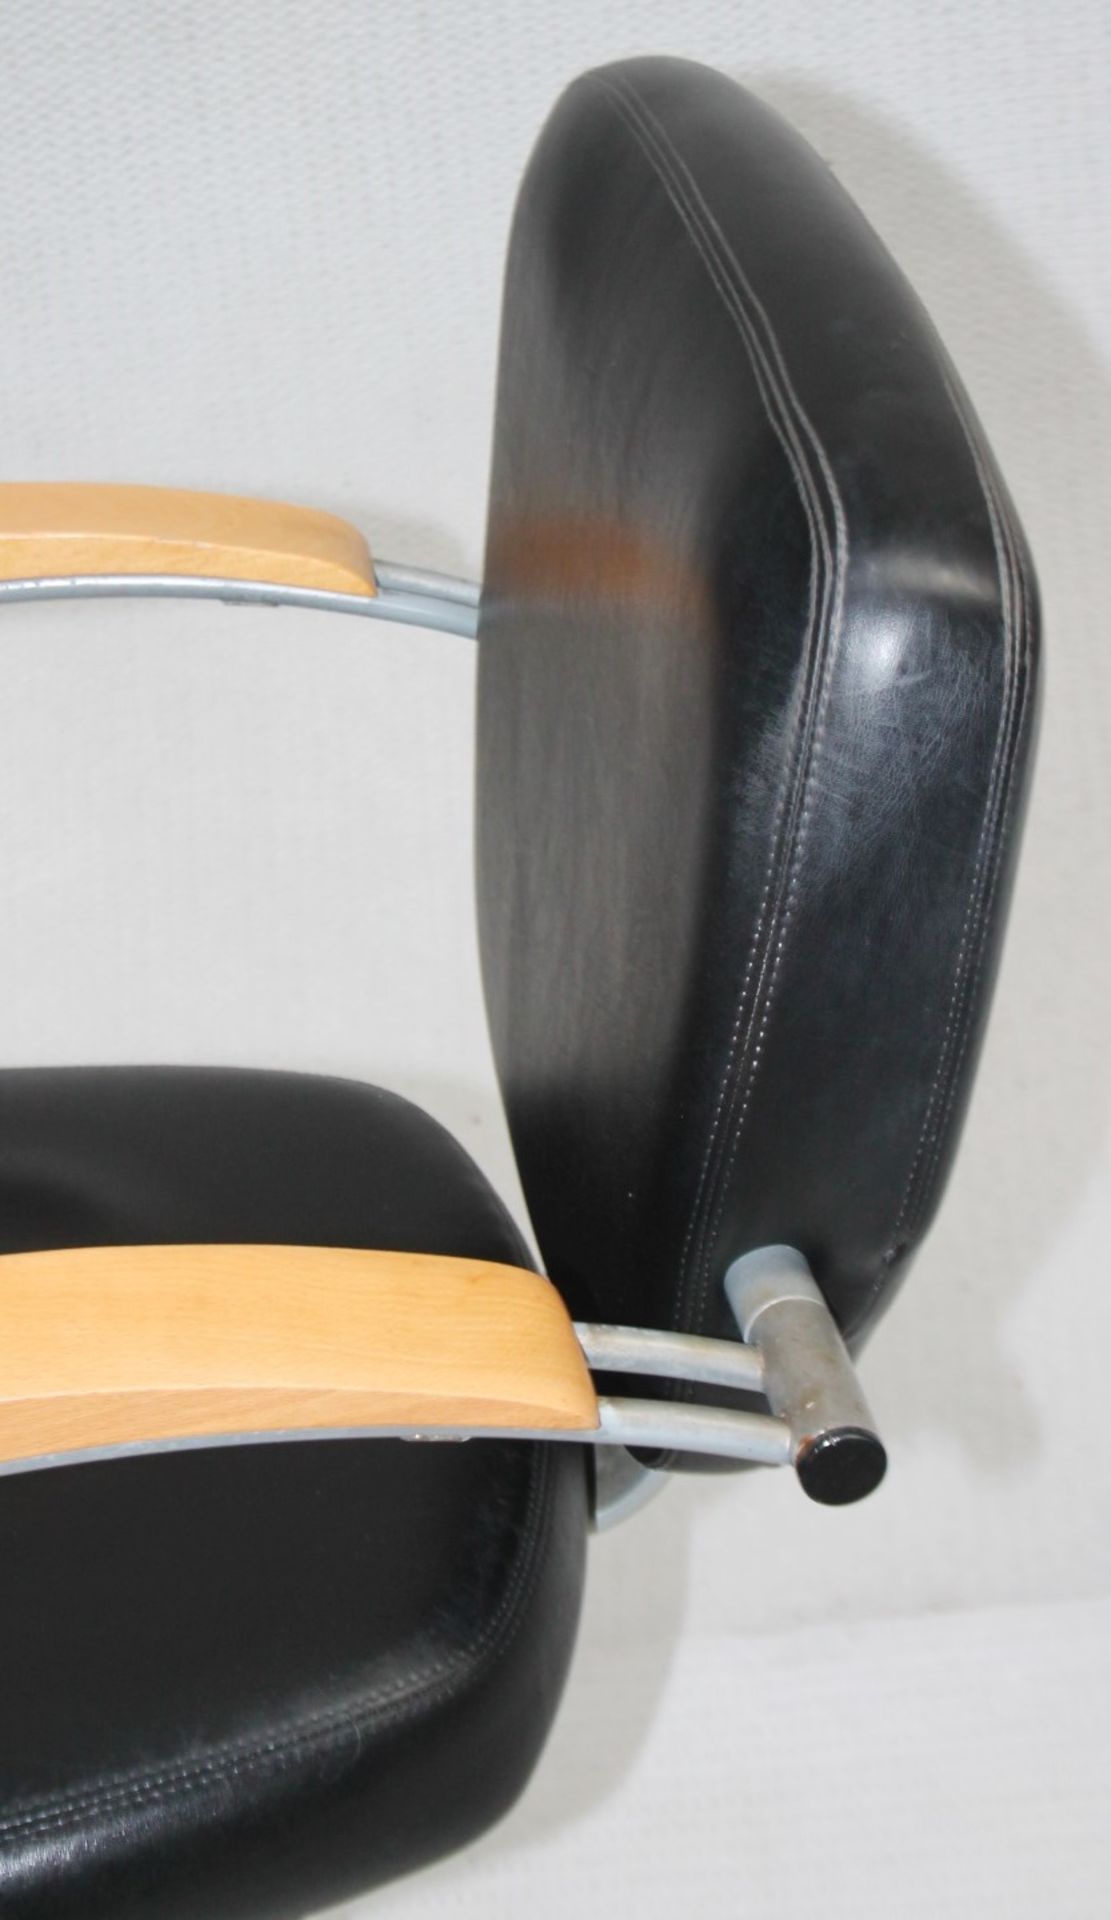 1 x Adjustable Black Hydraulic Barber Hairdressing Chair - Recently Removed From A Boutique Hair - Image 7 of 10